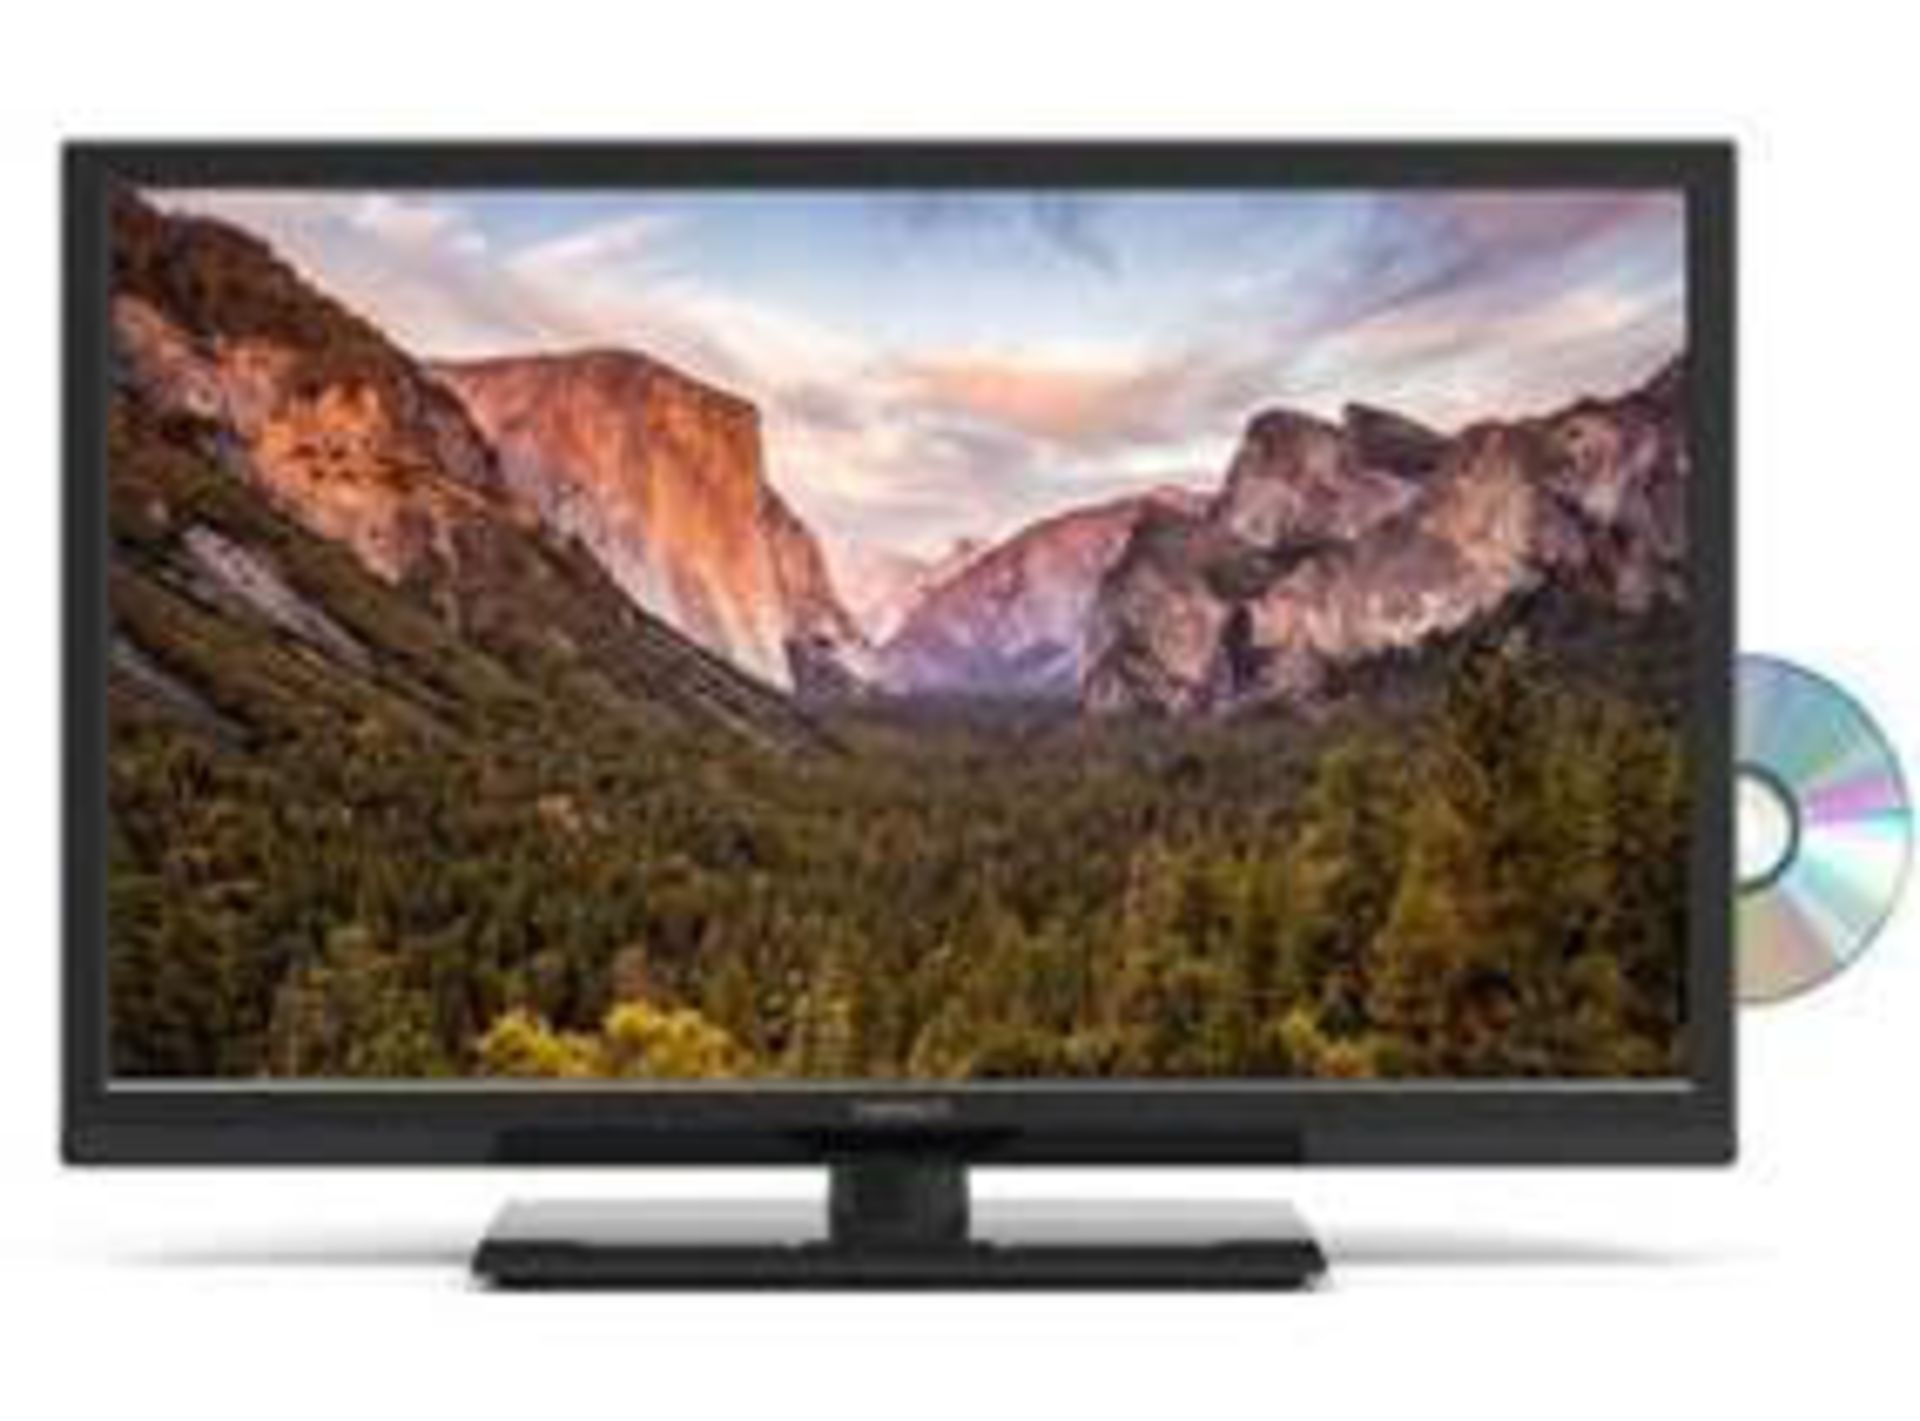 V Brand New Veltech 24" LED Full HD 1080p TV - Built in DVD Player - Built in Freeview X 2 YOUR